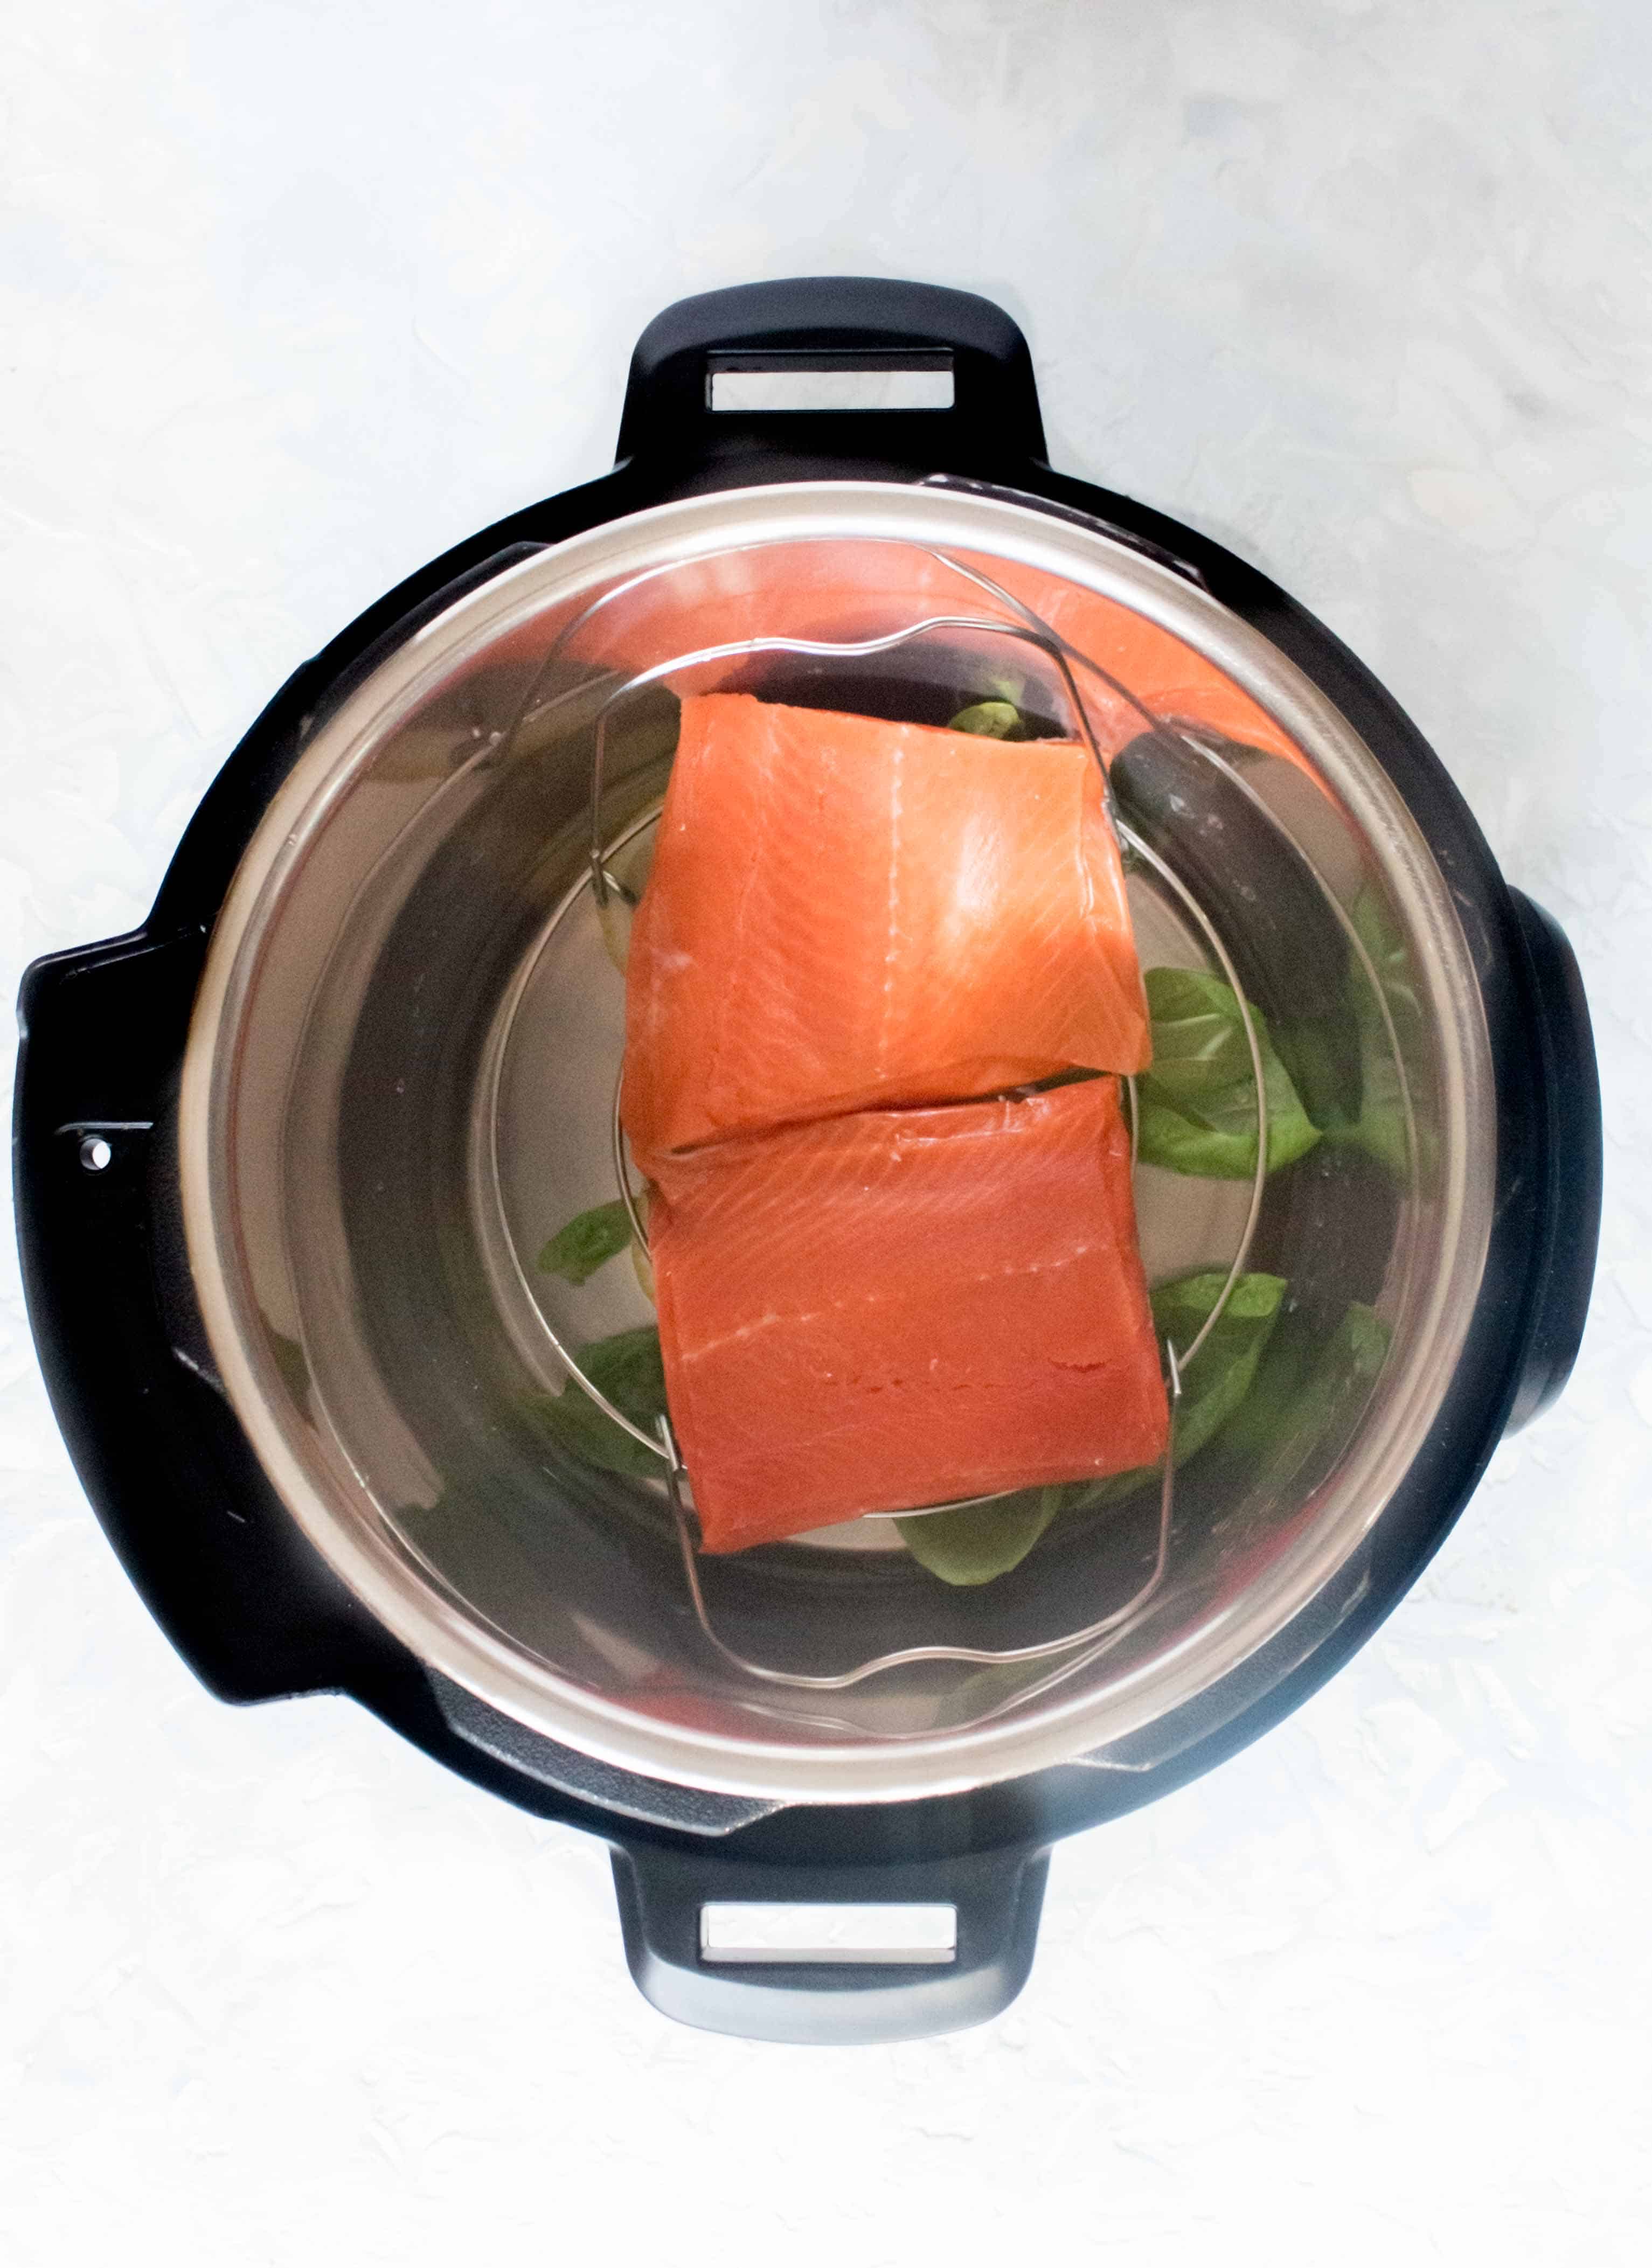 How to Make Salmon in the Instant Pot